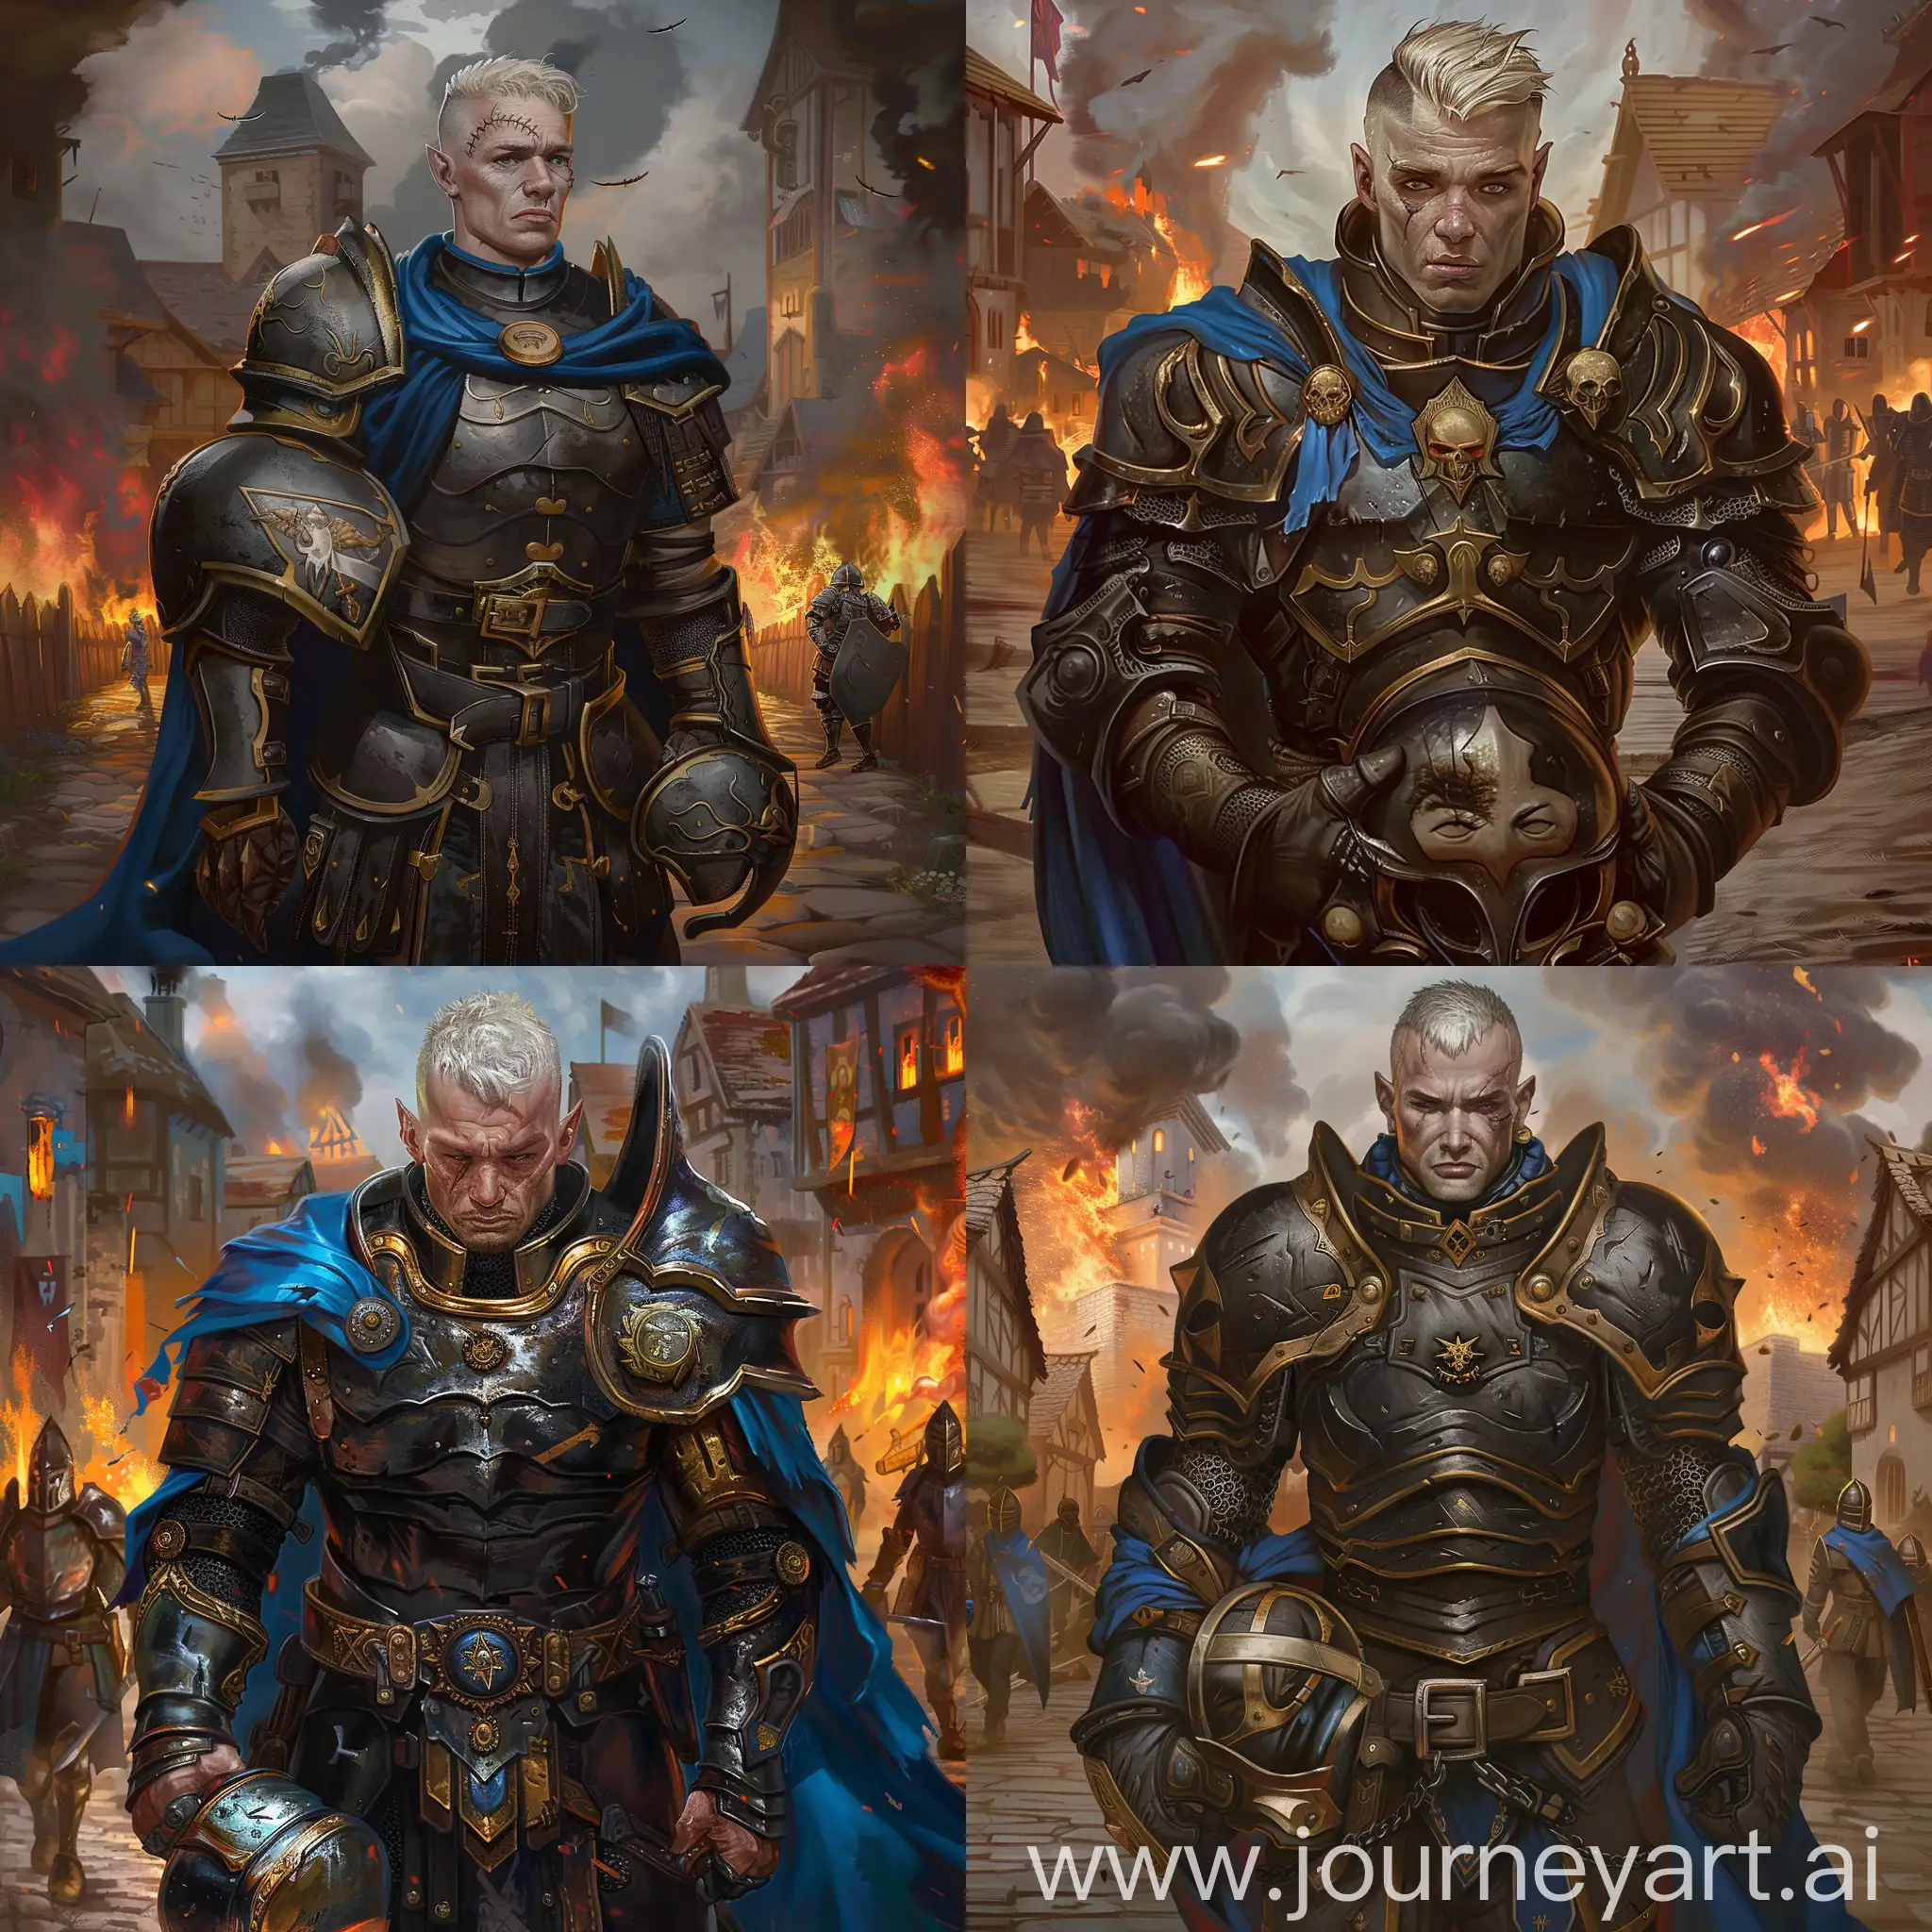 Draw a realistic art of character from the "Pathfinder: Wrath of the Righteous" video game according to the following description: 
He is a tall athletic human paladin. He has pale blond hair with medieval monk haircut. His rugged face of a grizzled veteran is clean shaven. He has a large scar over his face.
He wears a full suit of paladin plate armor with helmet in his hands. Armor is black with gold trim, with blue cape over the shoulders.
He has a mournful expression while making his way through a burning village on the background